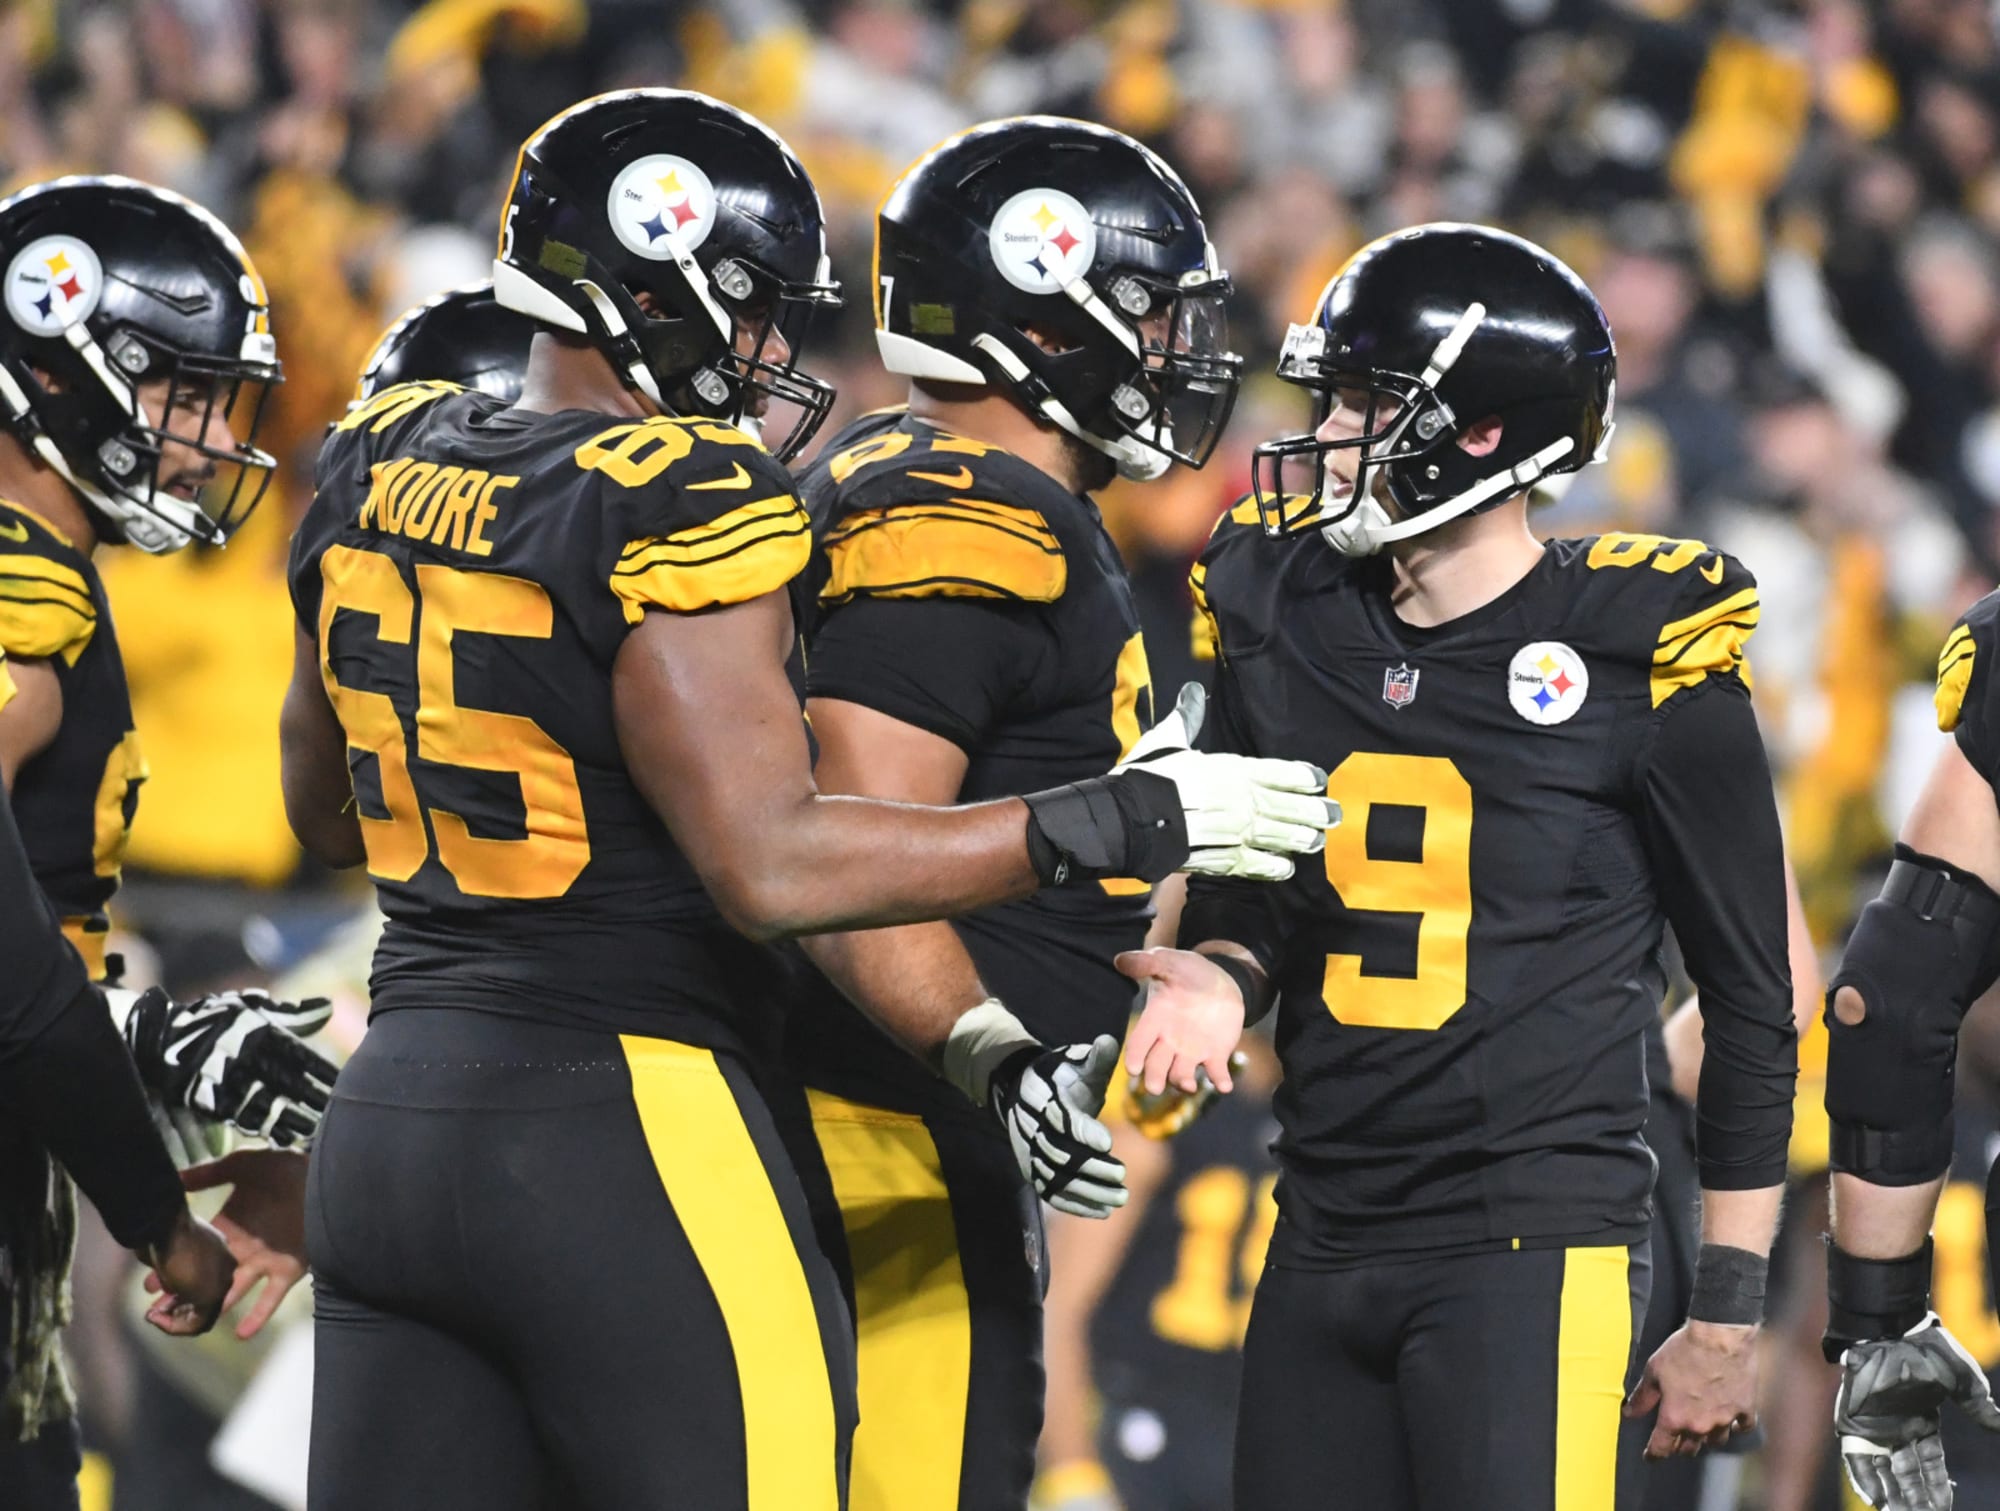 Detroit Lions vs. Steelers: Week 10 betting odds, spread, and